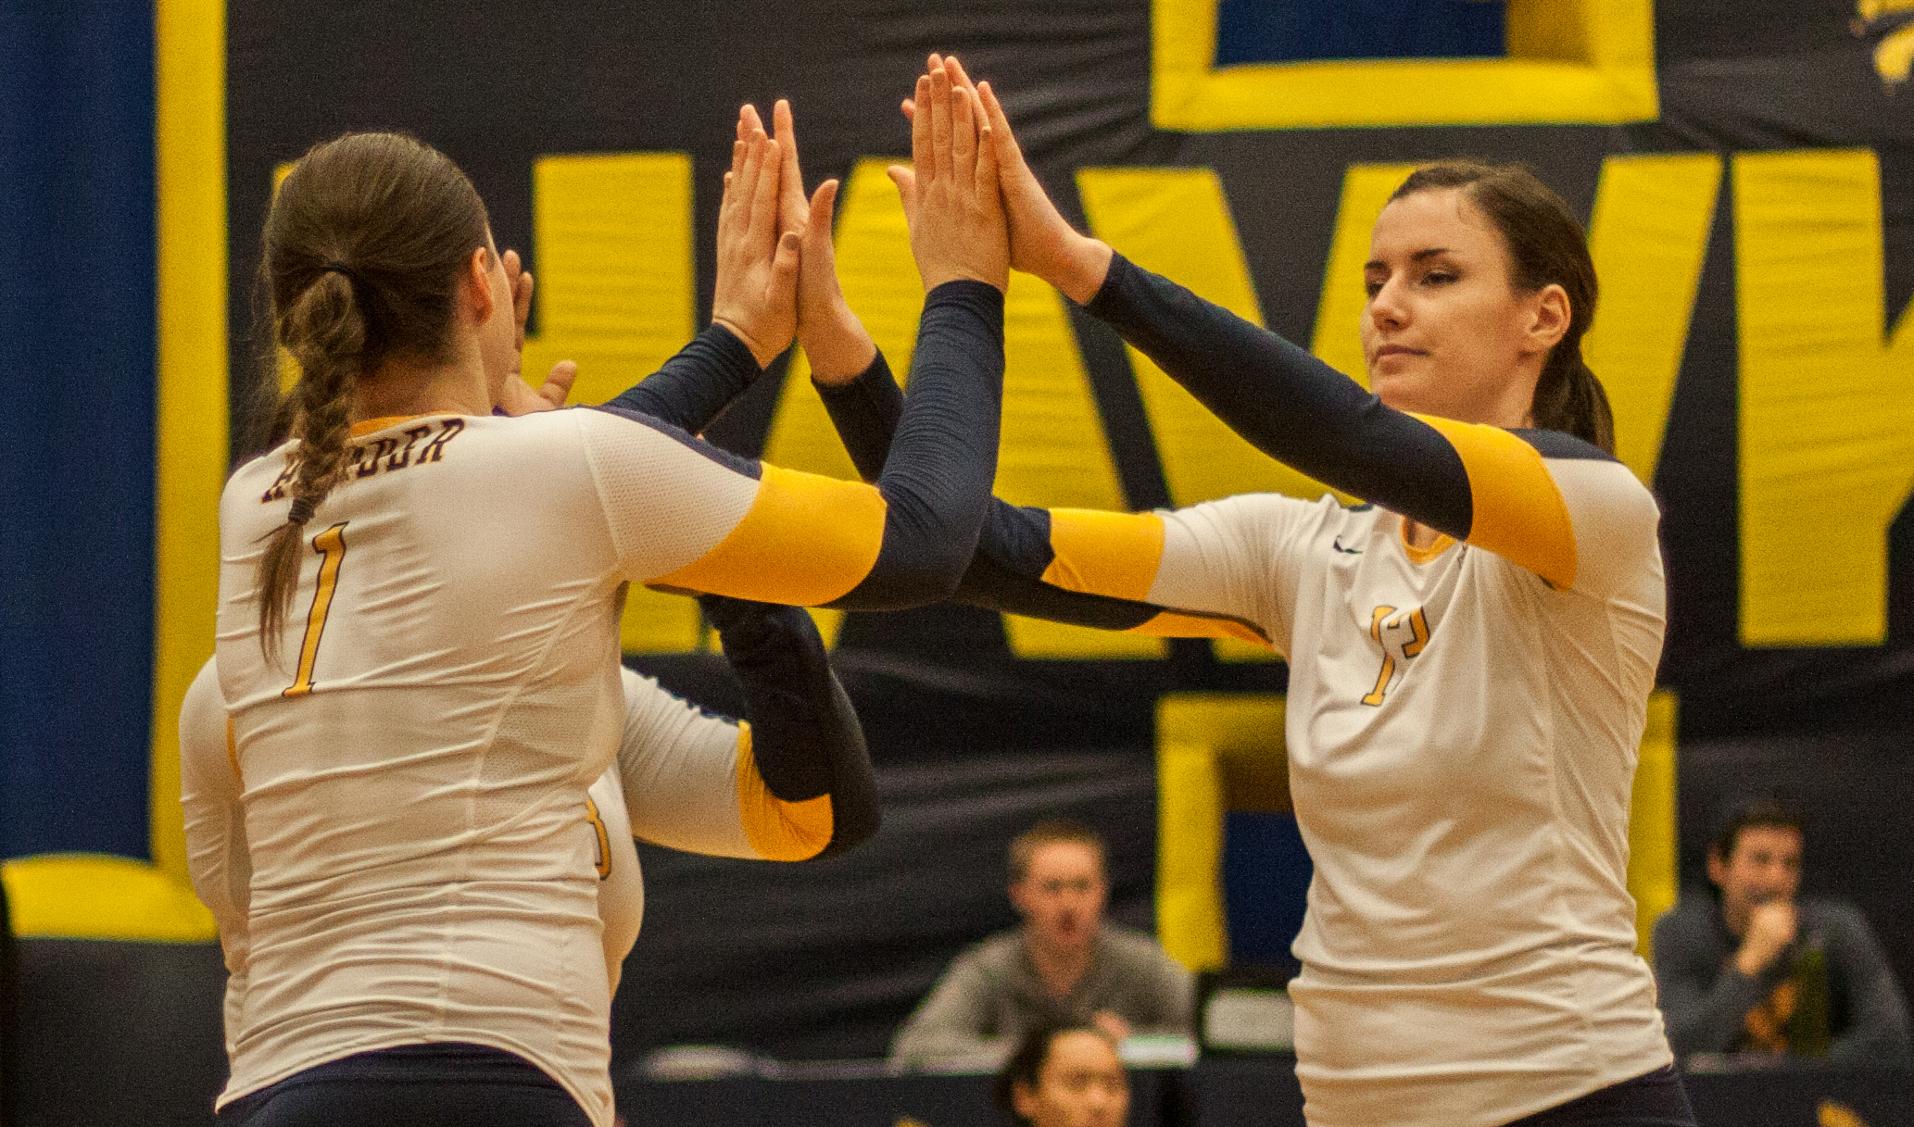 DOMINANT SERVING HELPS HUMBER SWEEP CAMBRIAN